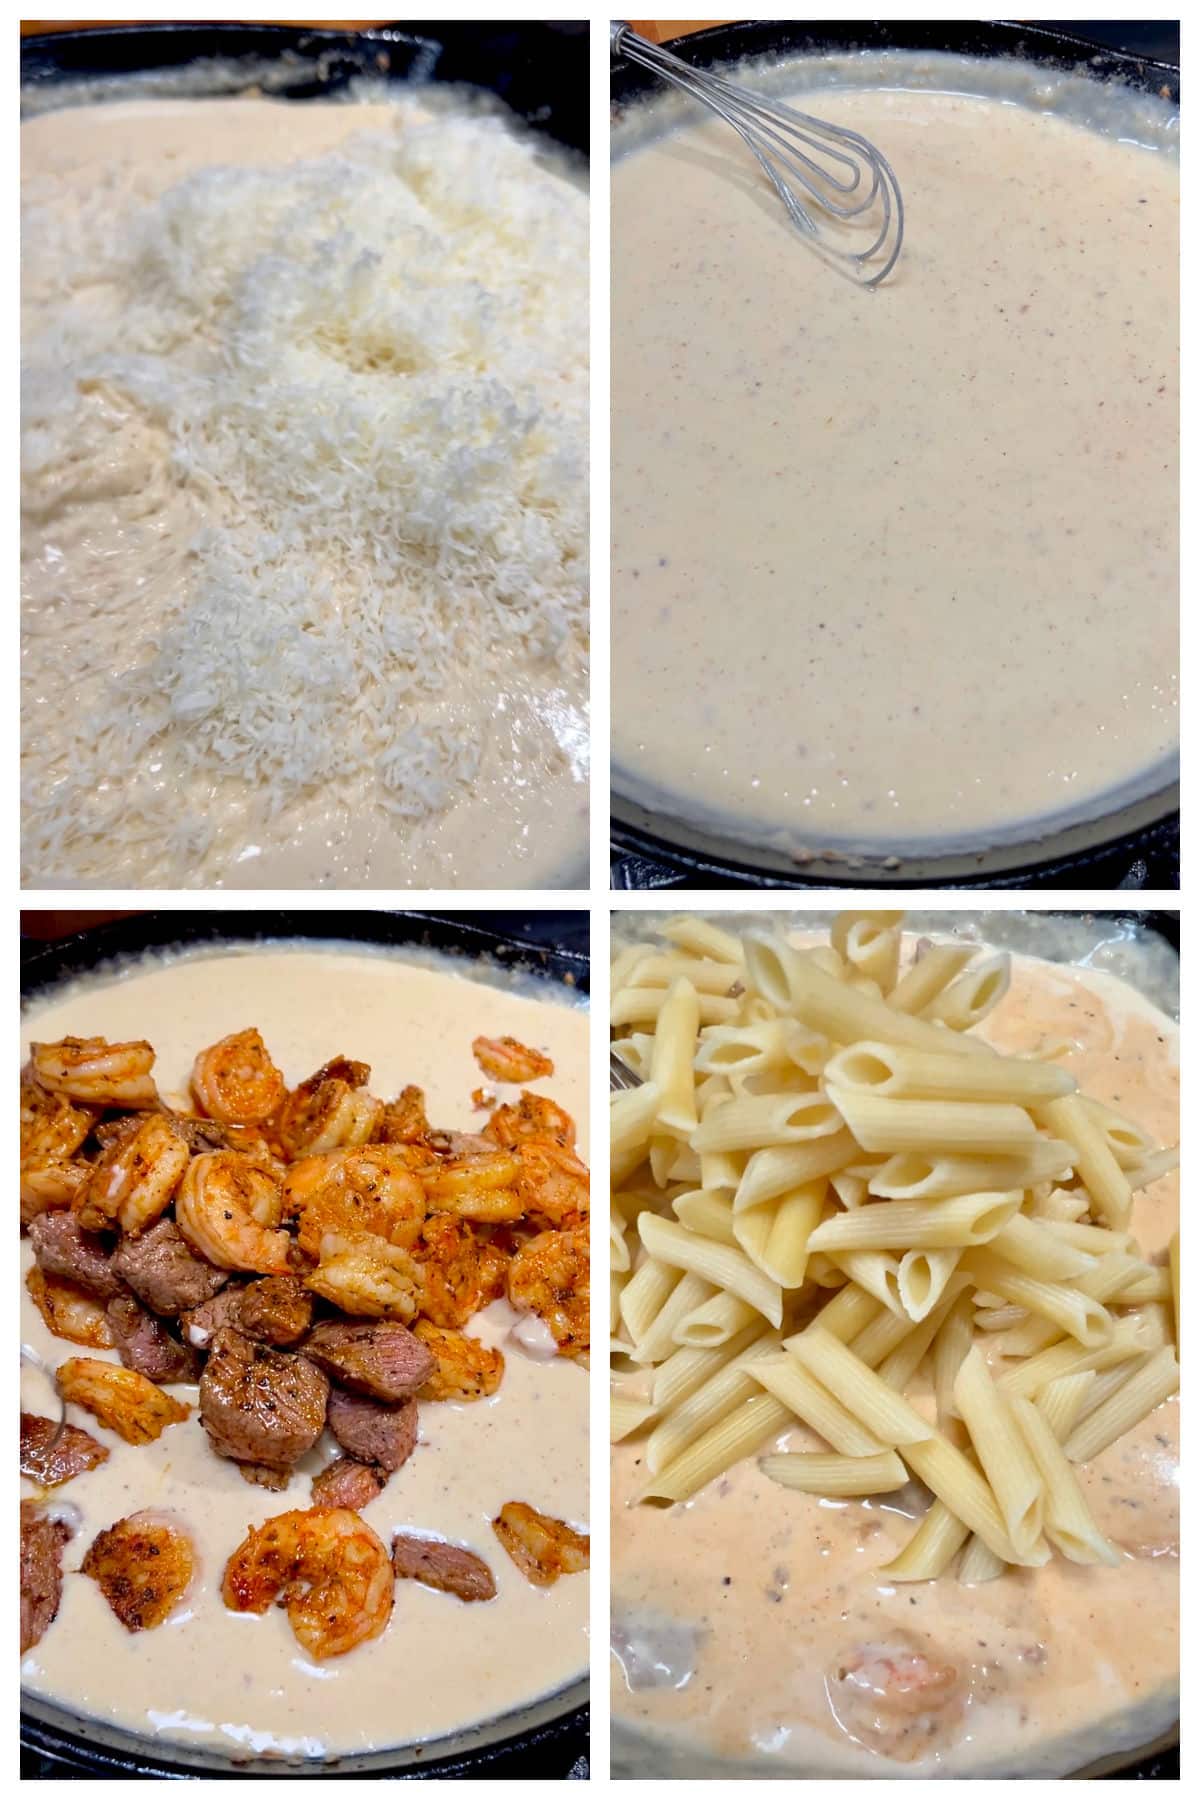 Collage making alfredo sauce with steak, shrimp and pasta.